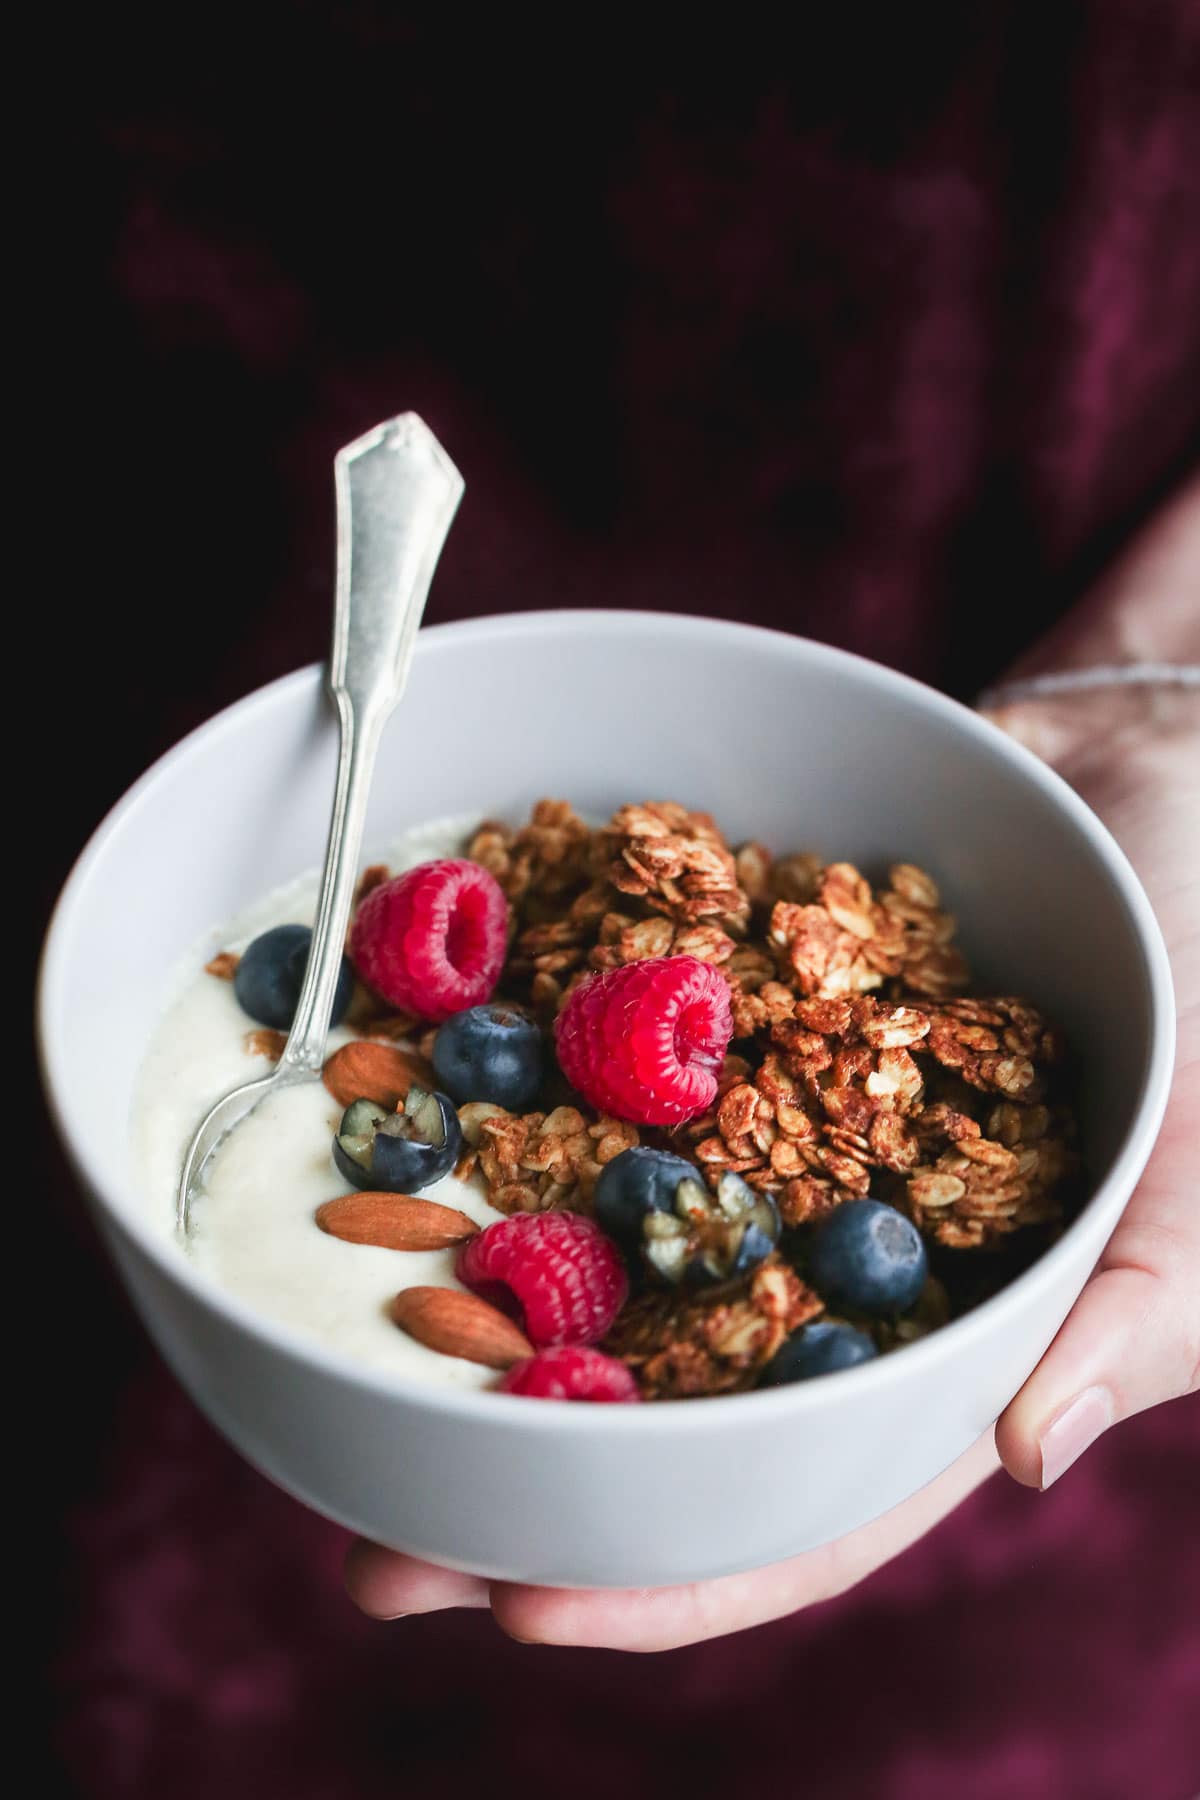 Holding a bowl of yogurt with granola and fruit, with a teaspoon